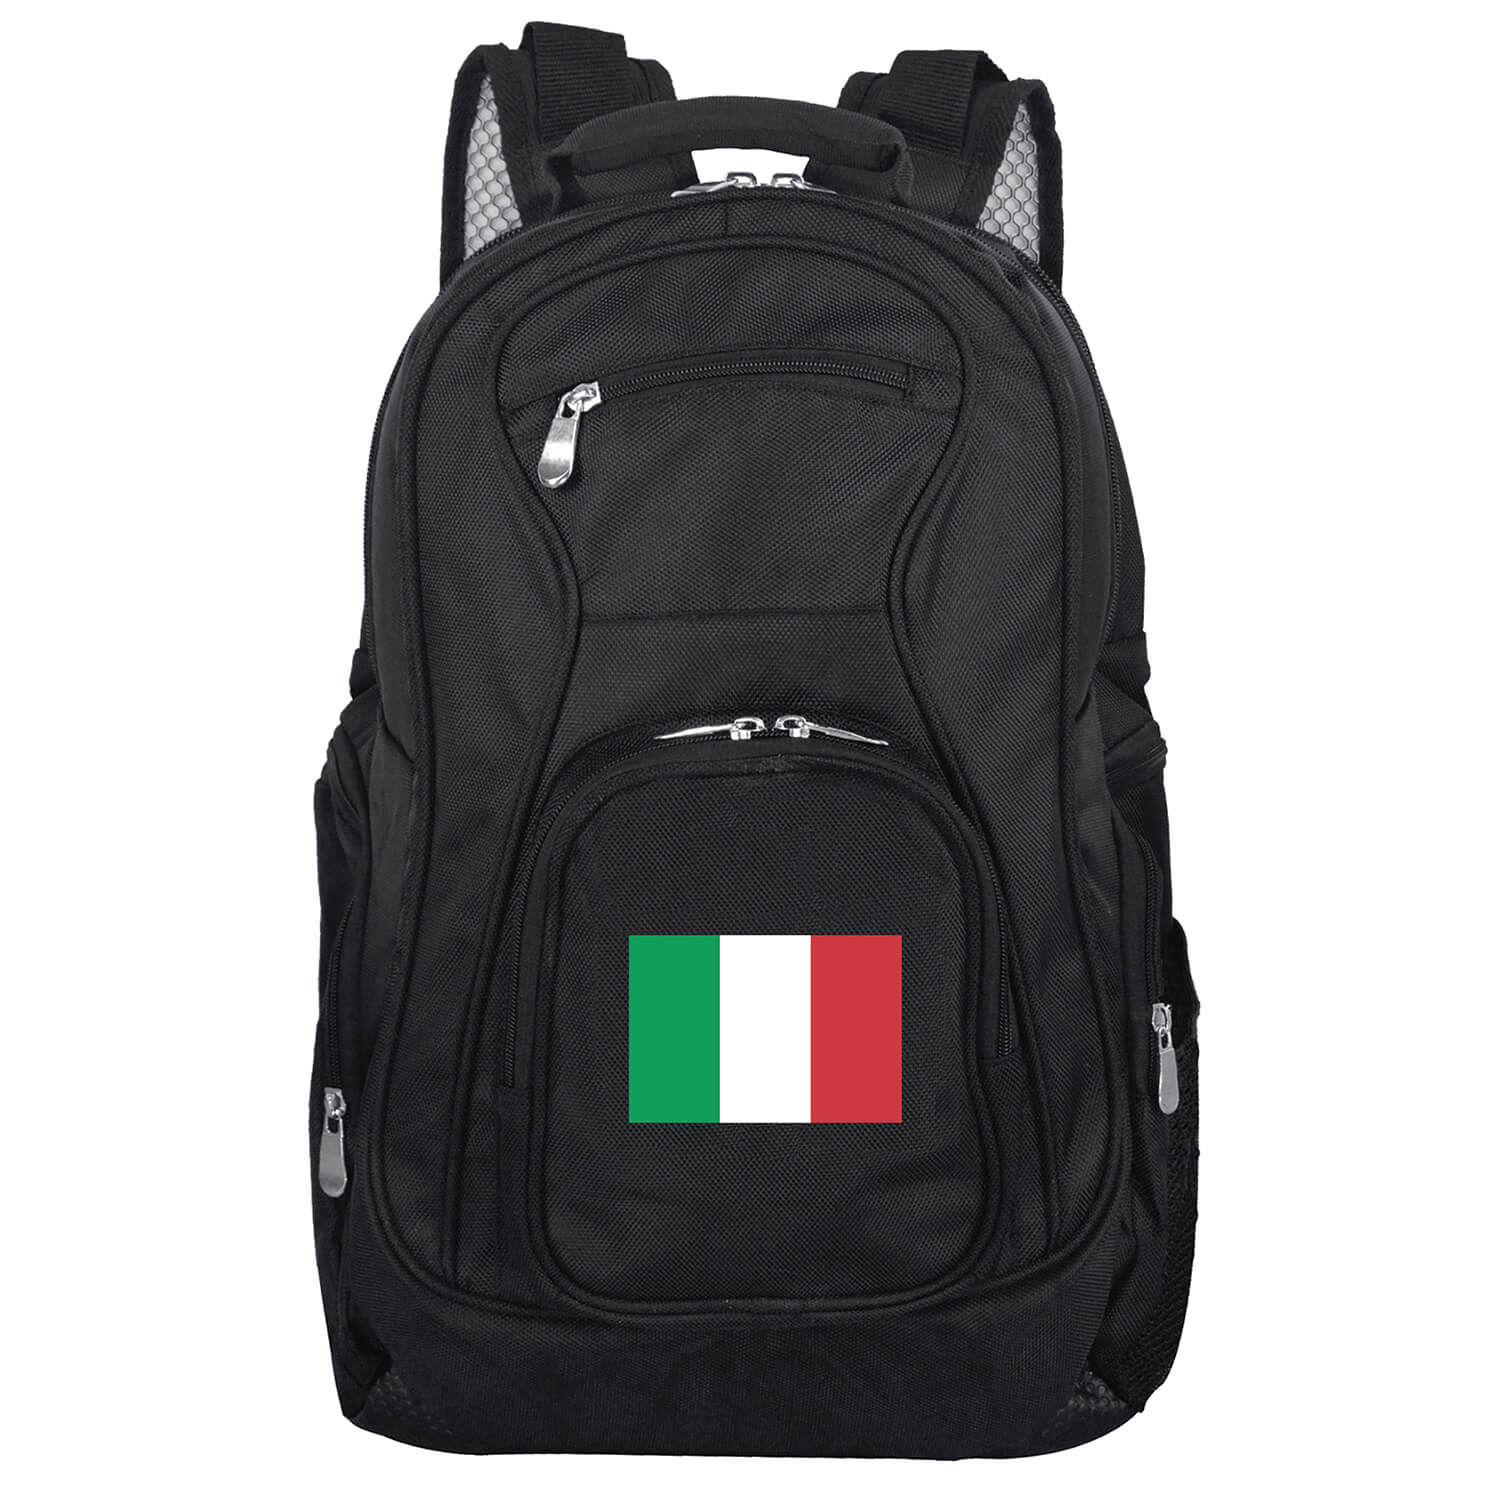 Team Italy Premium Laptop Backpack - Fits Most 17 Inch Laptops and Tablets - Ideal for Work, Travel, School, College, and Commuting